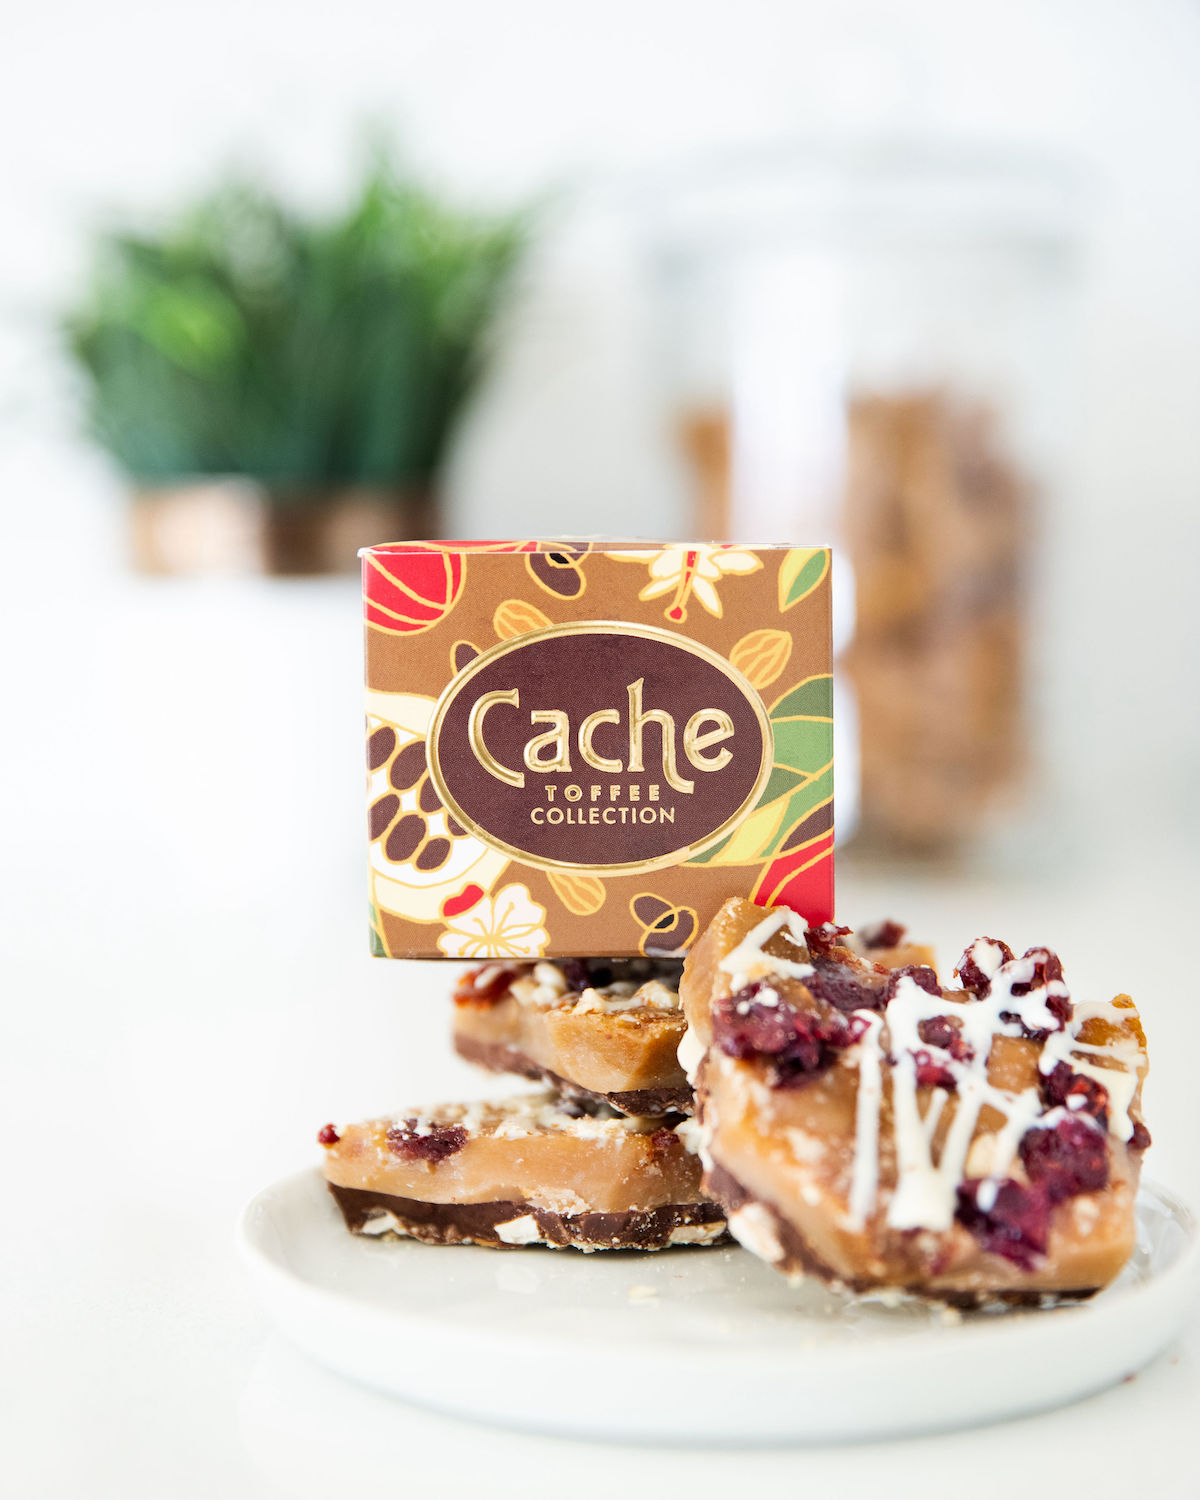 Cache-toffee-of-the-month-subscription-3